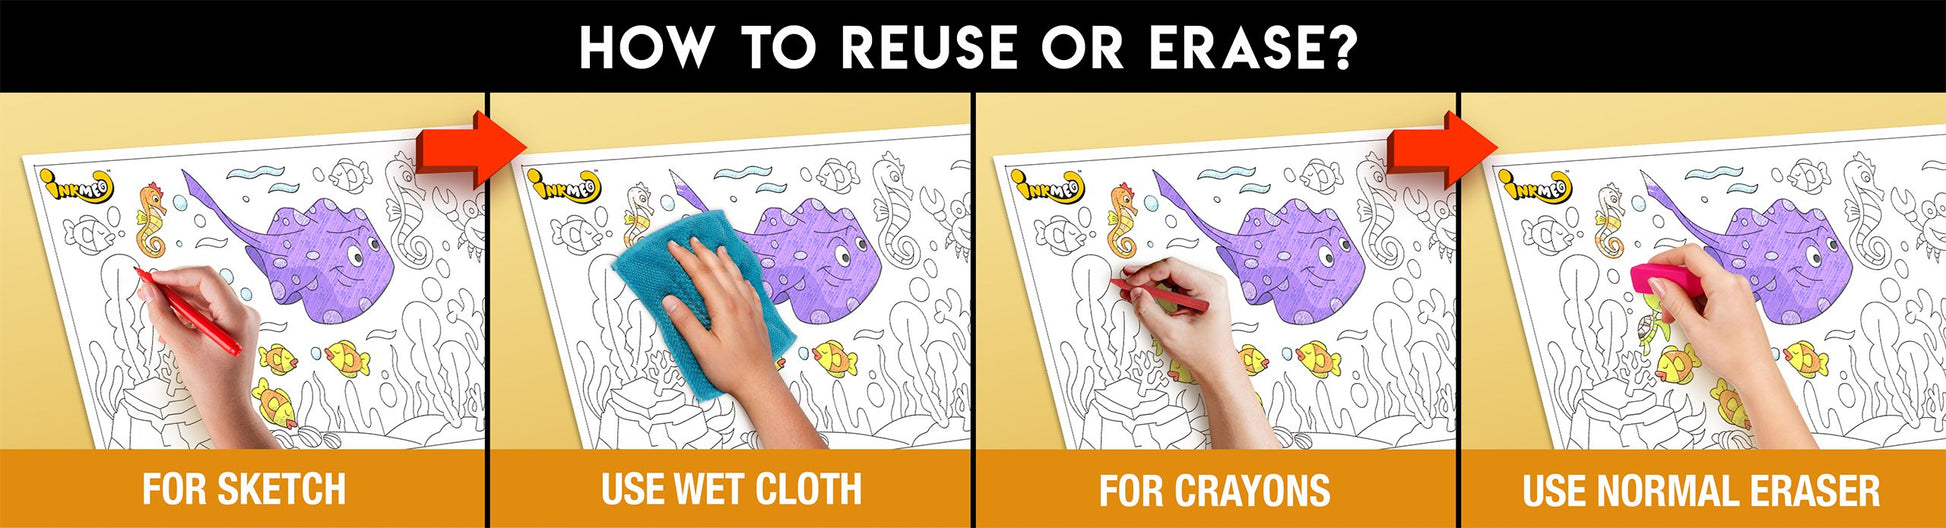 The image has a yellow background with four pictures demonstrating how to reuse or erase: the first picture depicts sketching on the aquarium sheet, the second shows using a wet cloth to remove sketches, the third image displays crayons colouring on the aquarium sheet, and the fourth image illustrates erasing crayons with a regular eraser.